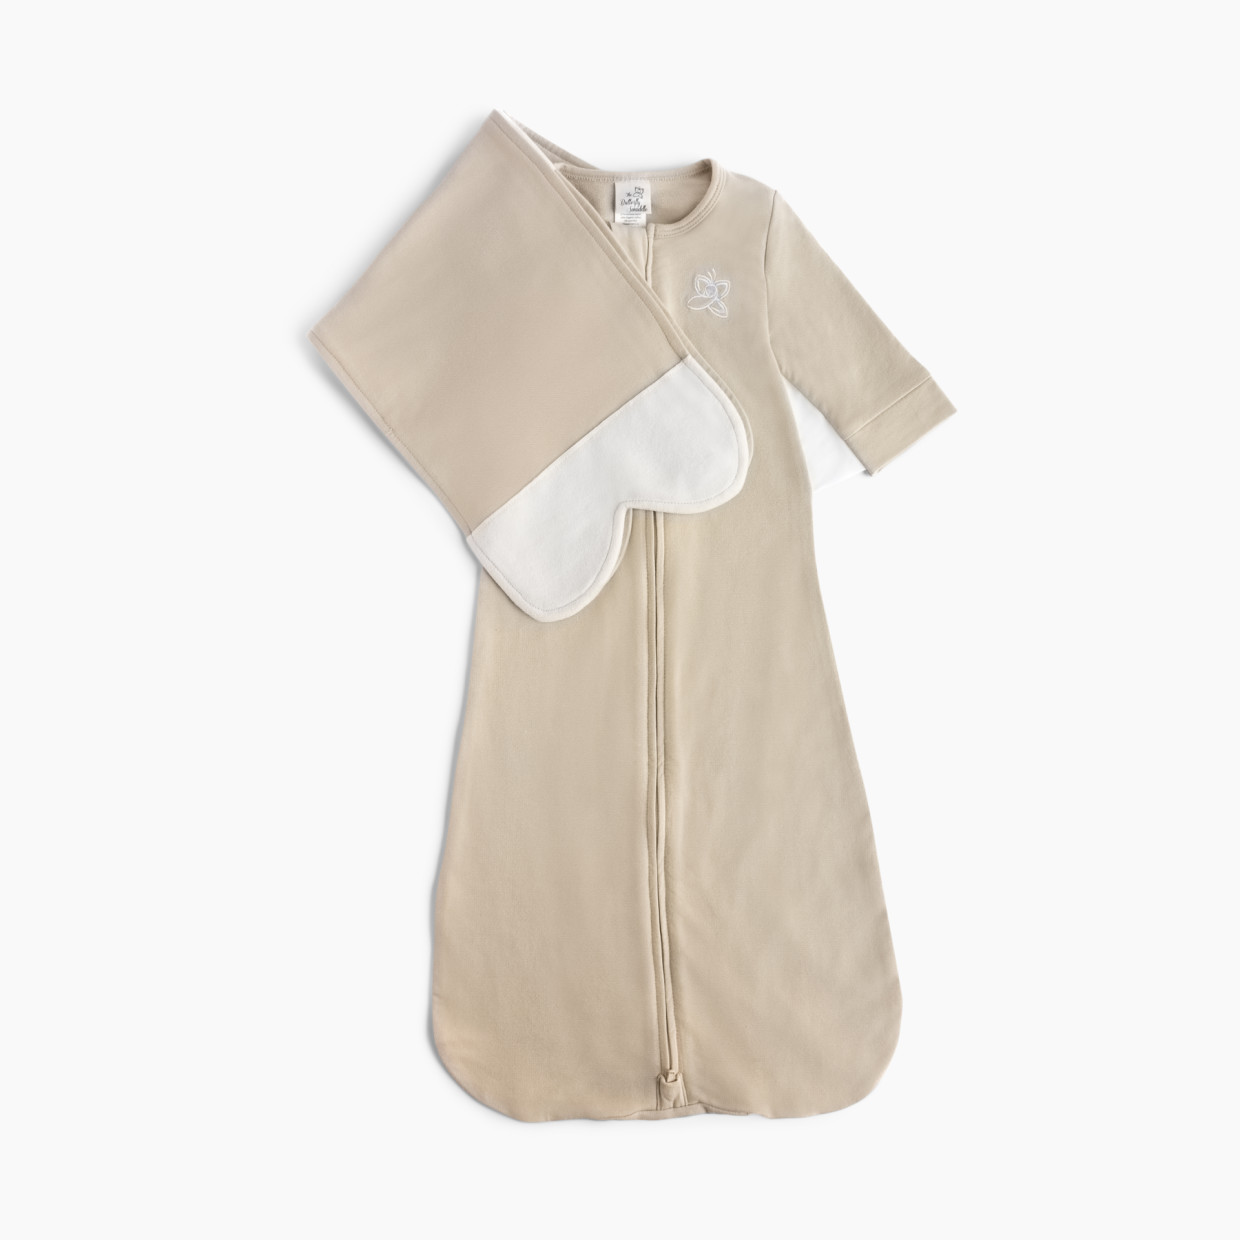 The Butterfly Swaddle Swaddle and Transitional Sleep Sack in One - Cozy Oat, Med/Large (12 -17 Lbs).